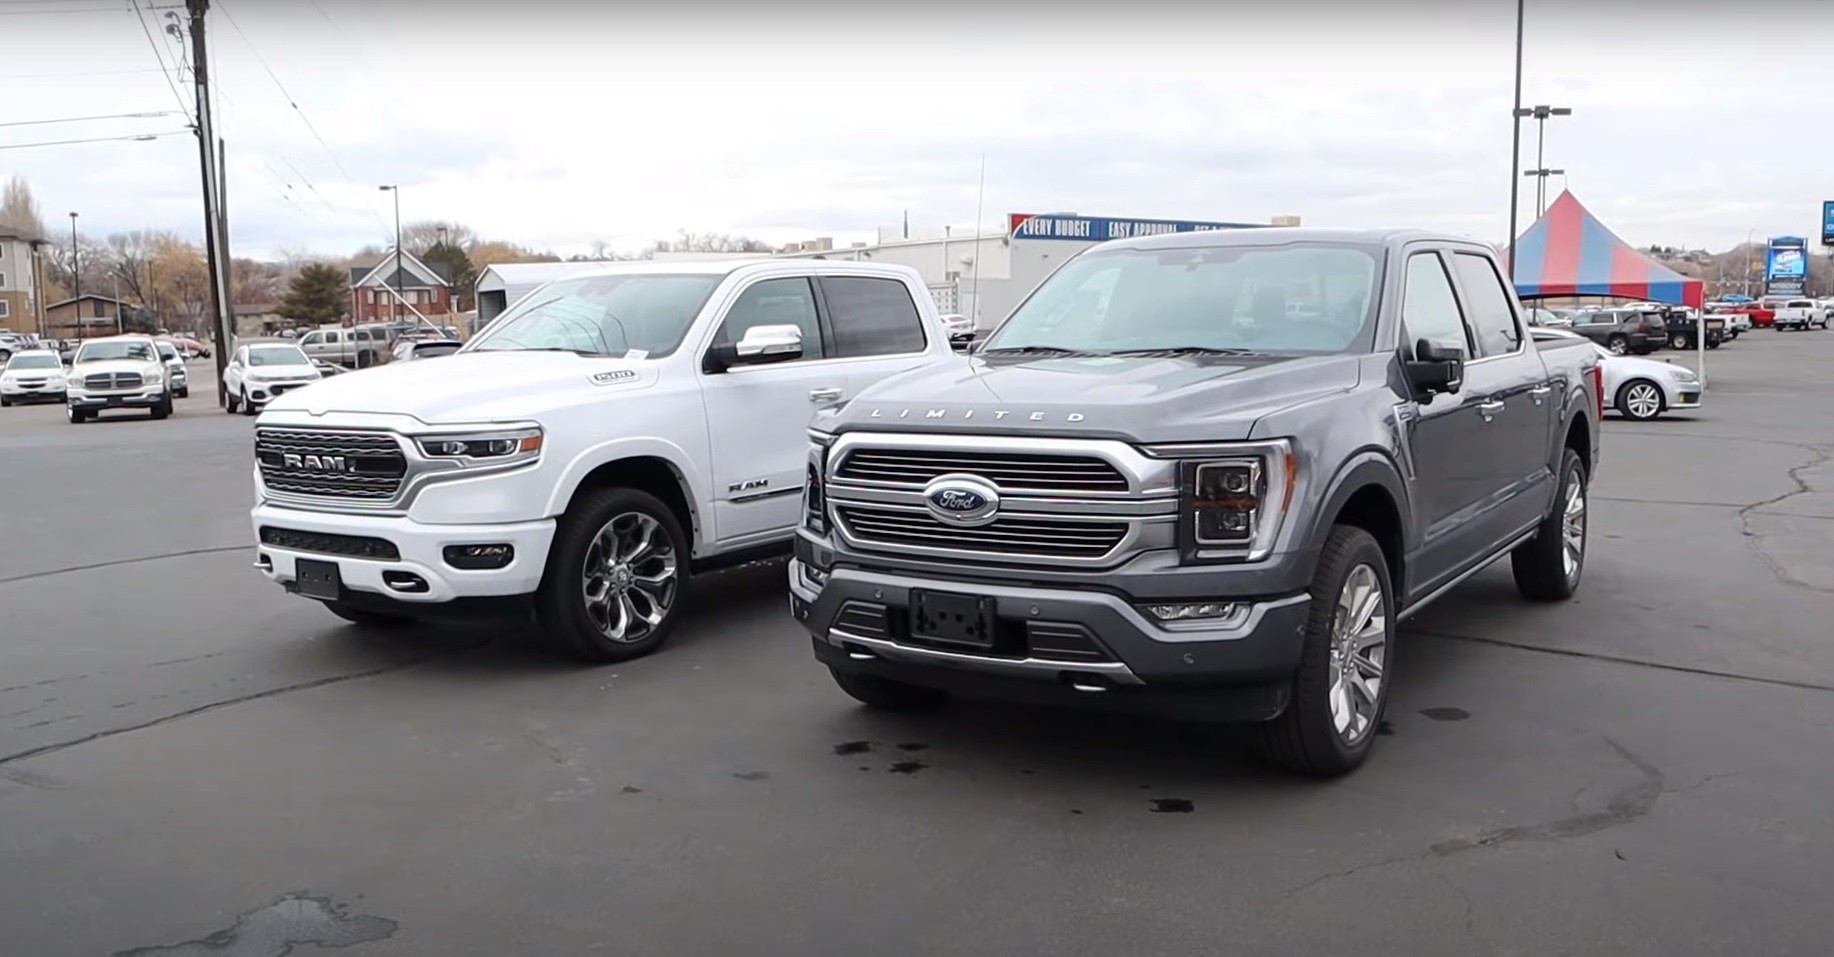 2021 RAM 1500 Limited vs. 2021 Ford F150 Limited in Luxury Truck Face